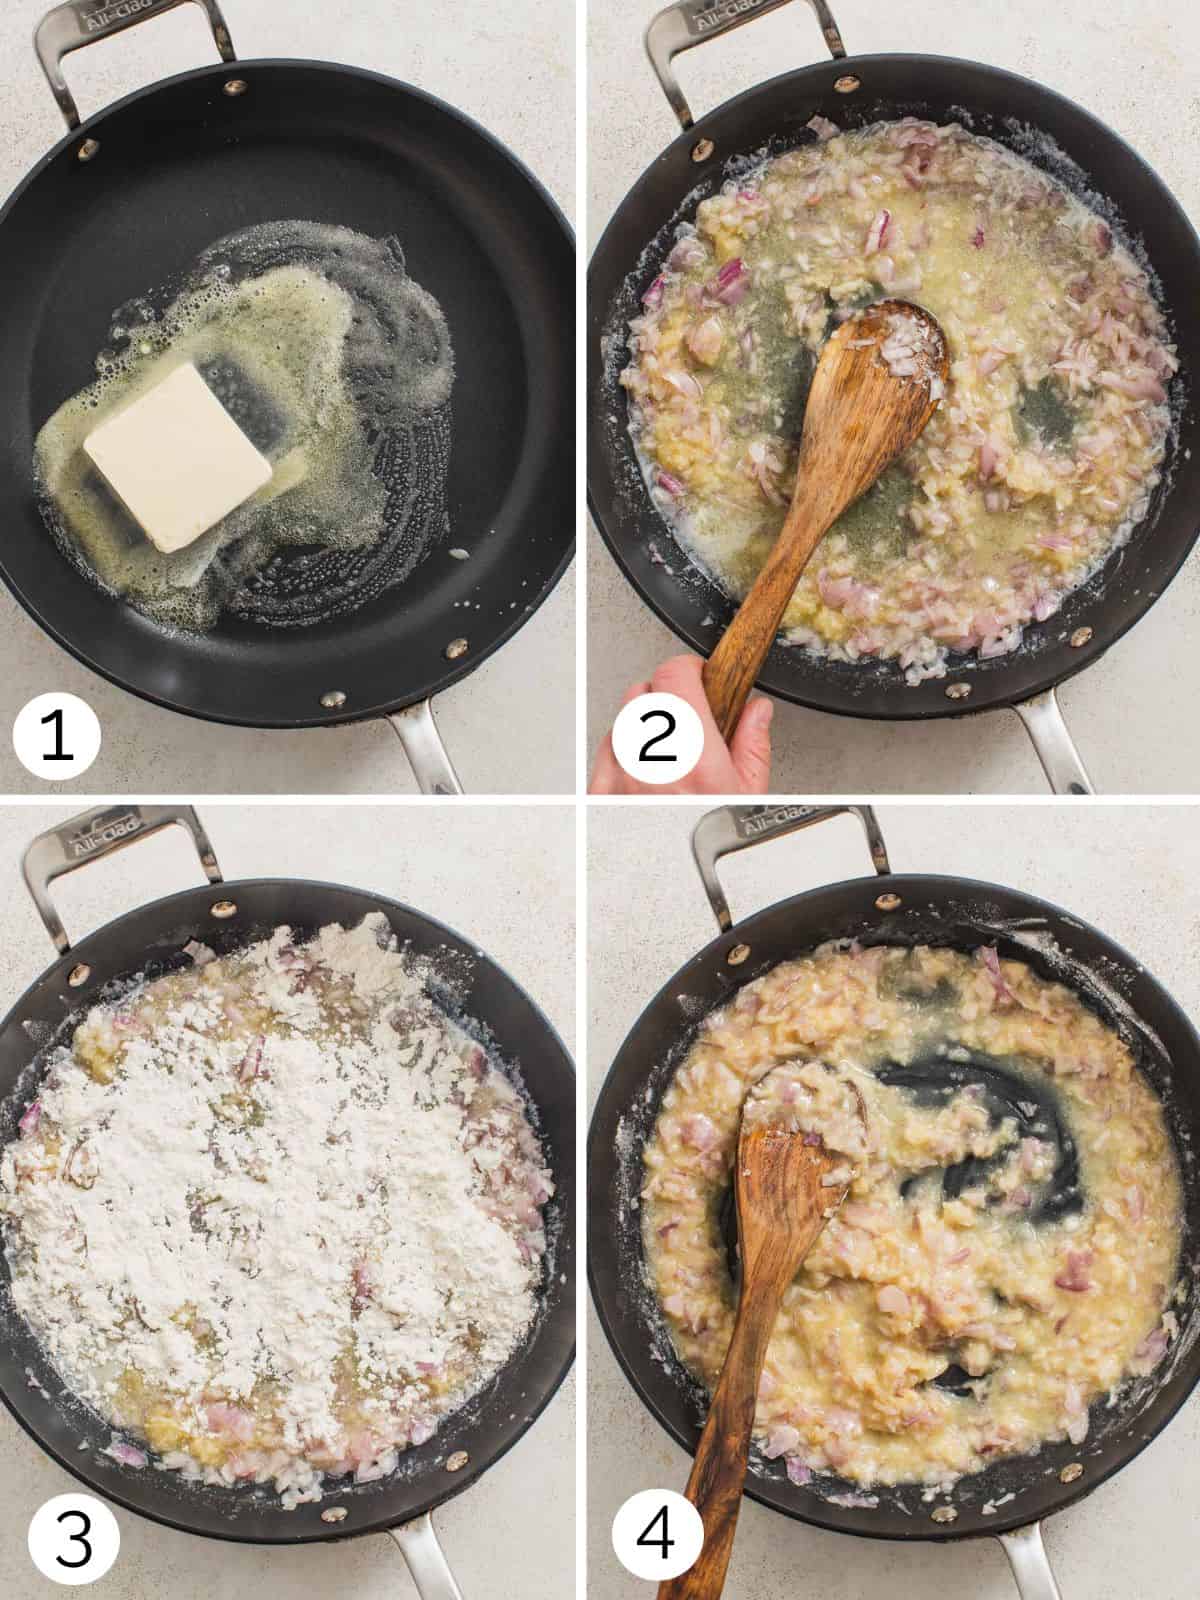 Steps for making creamed spinach sauce using frozen spinach with shallots, half and half, and flour.